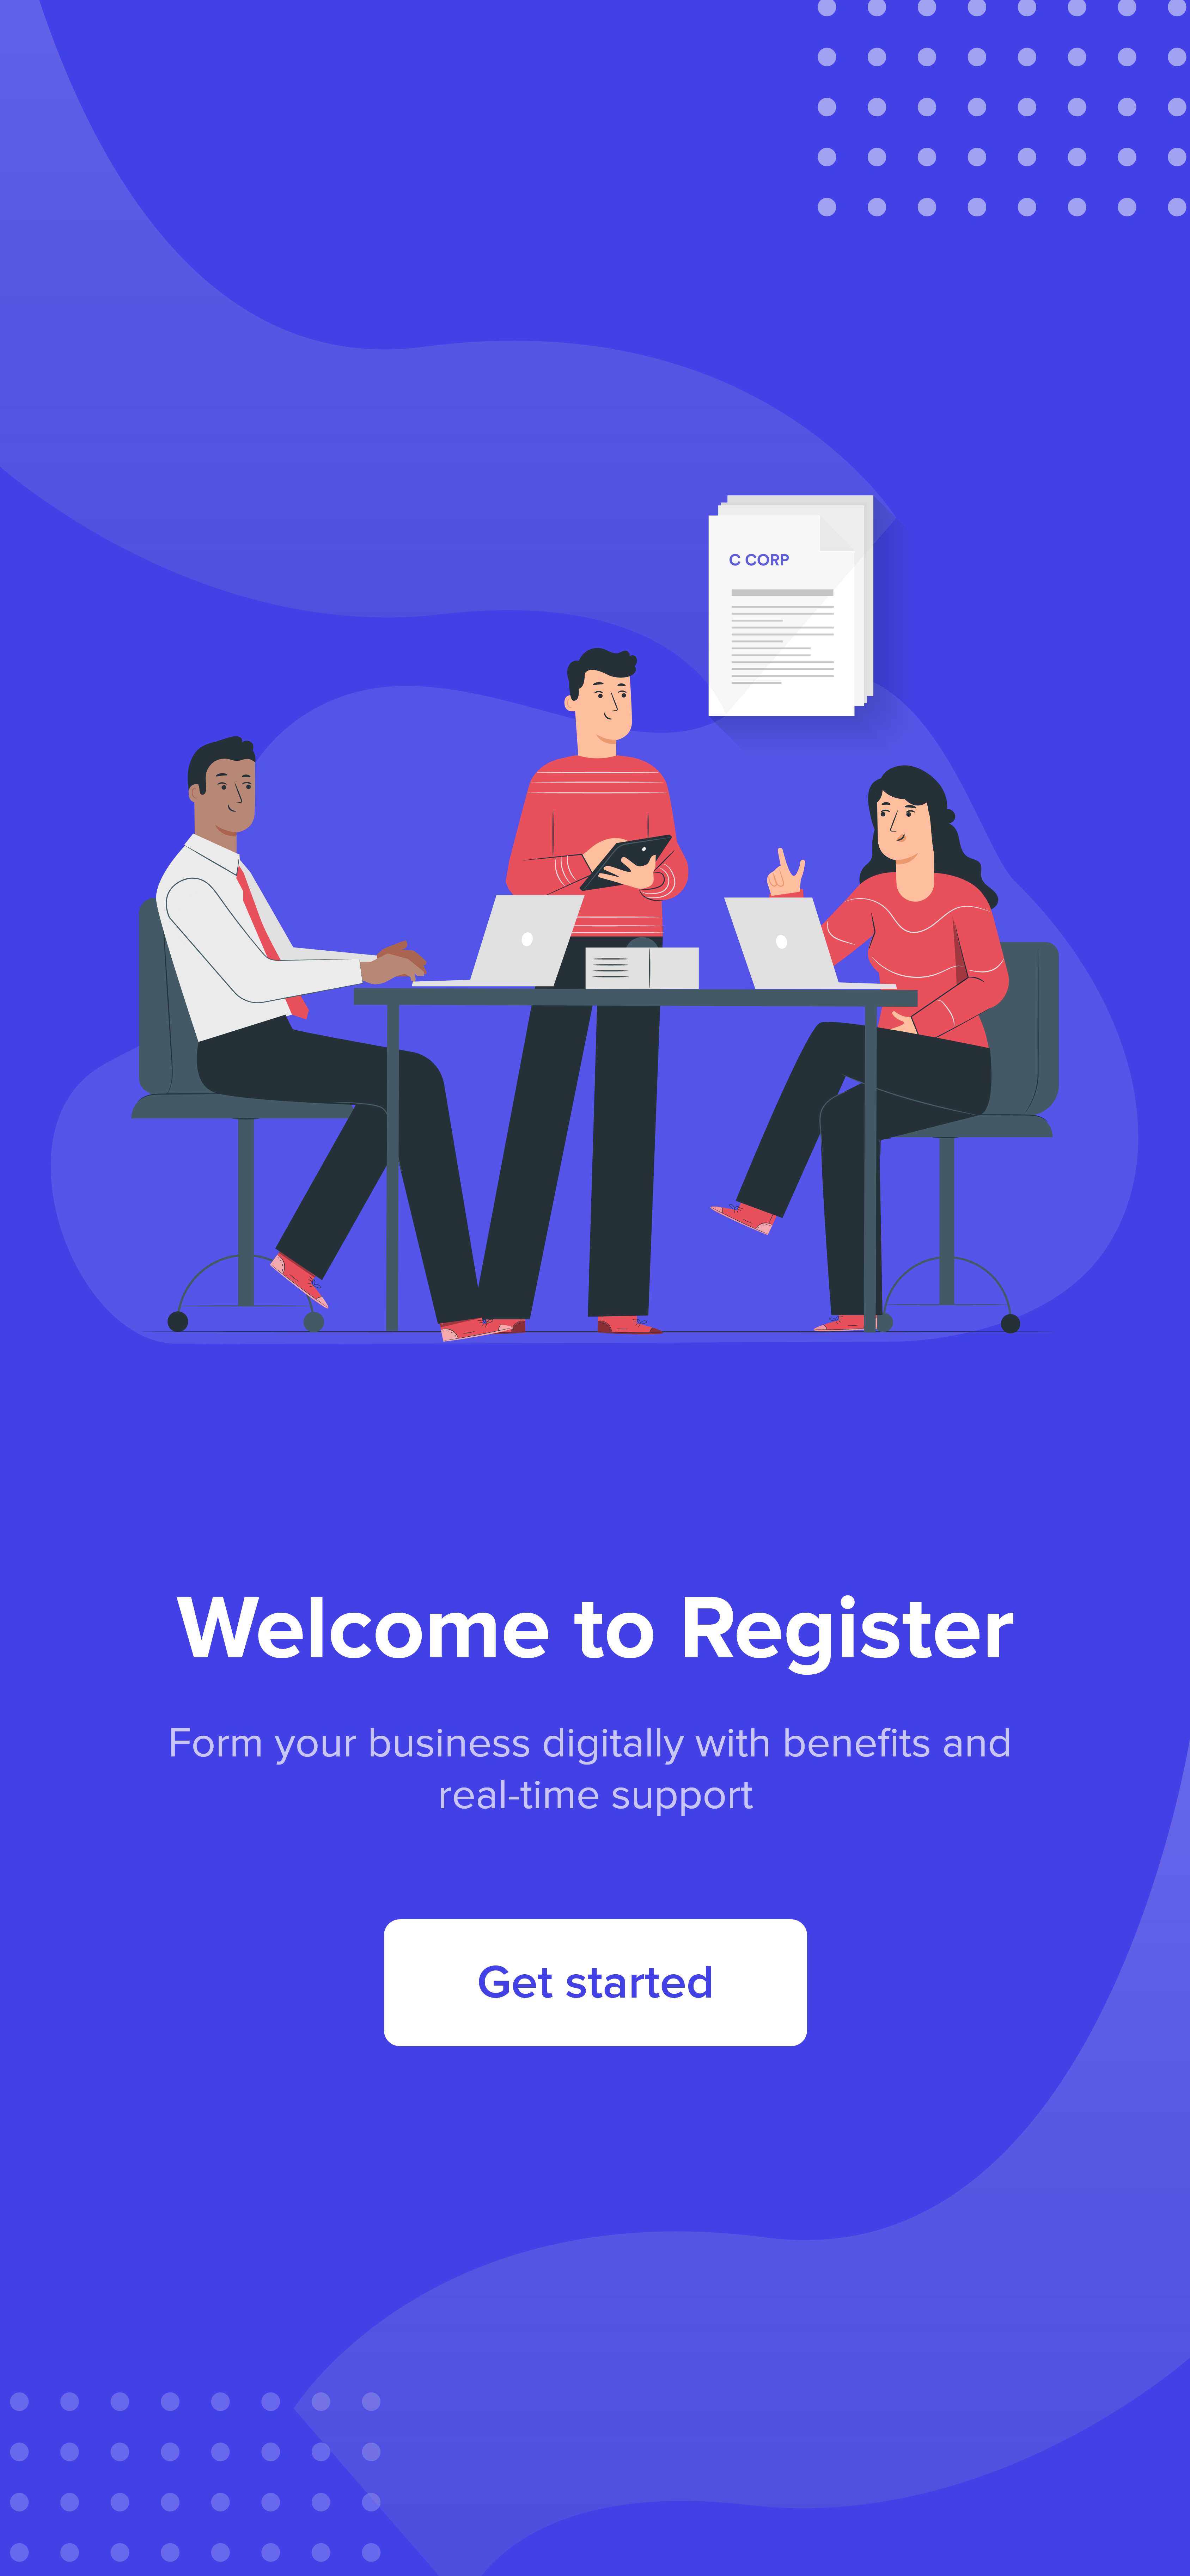 Welcome to Register